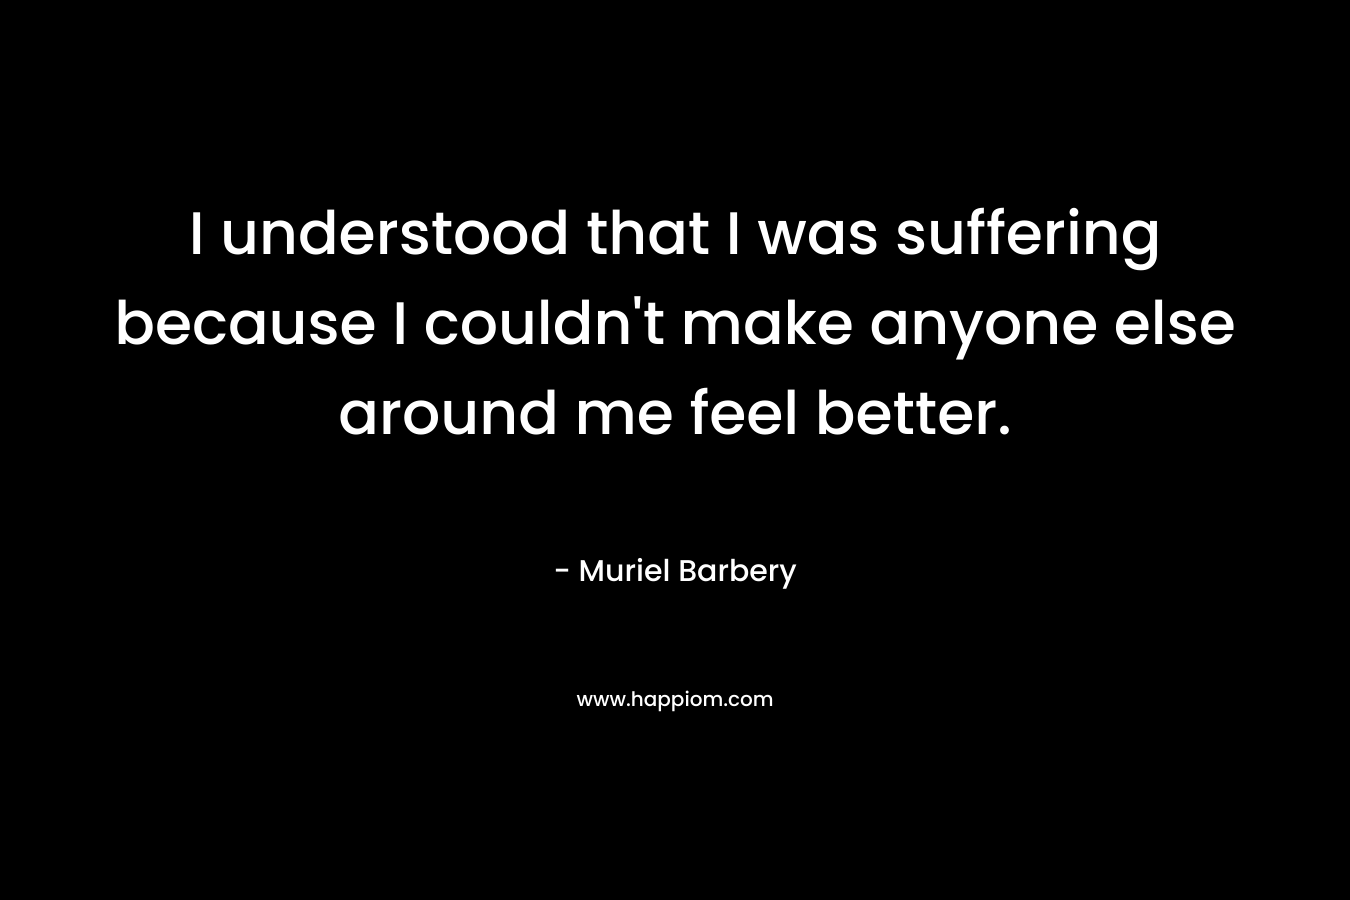 I understood that I was suffering because I couldn't make anyone else around me feel better.